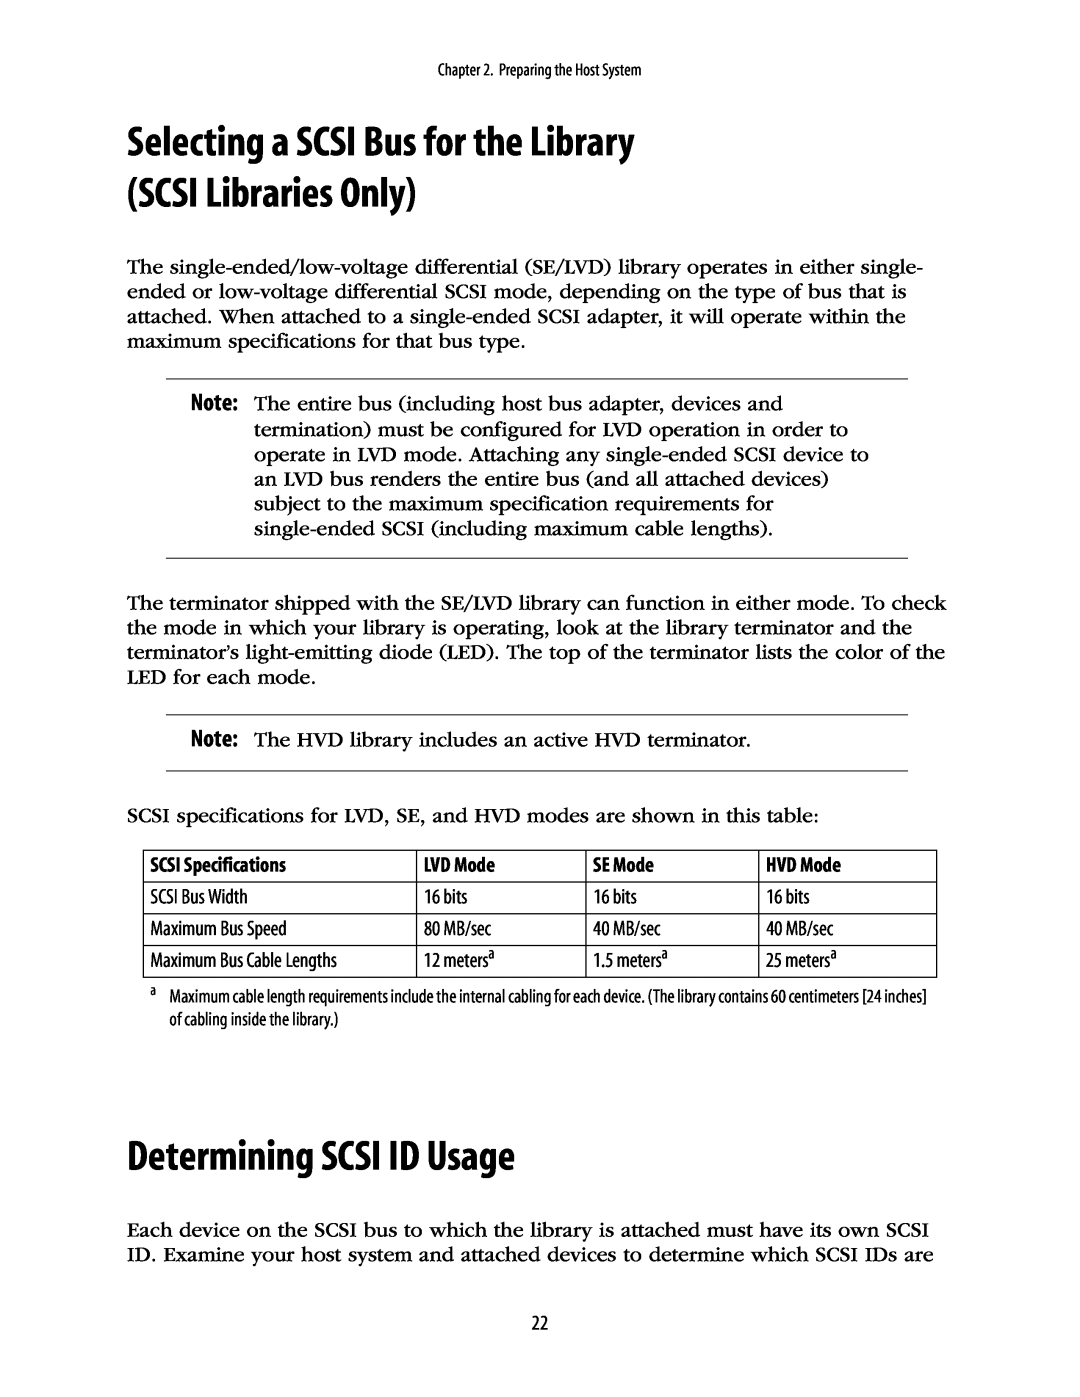 Spectra Logic 10000 manual Determining SCSI ID Usage, Selecting a SCSI Bus for the Library SCSI Libraries Only 